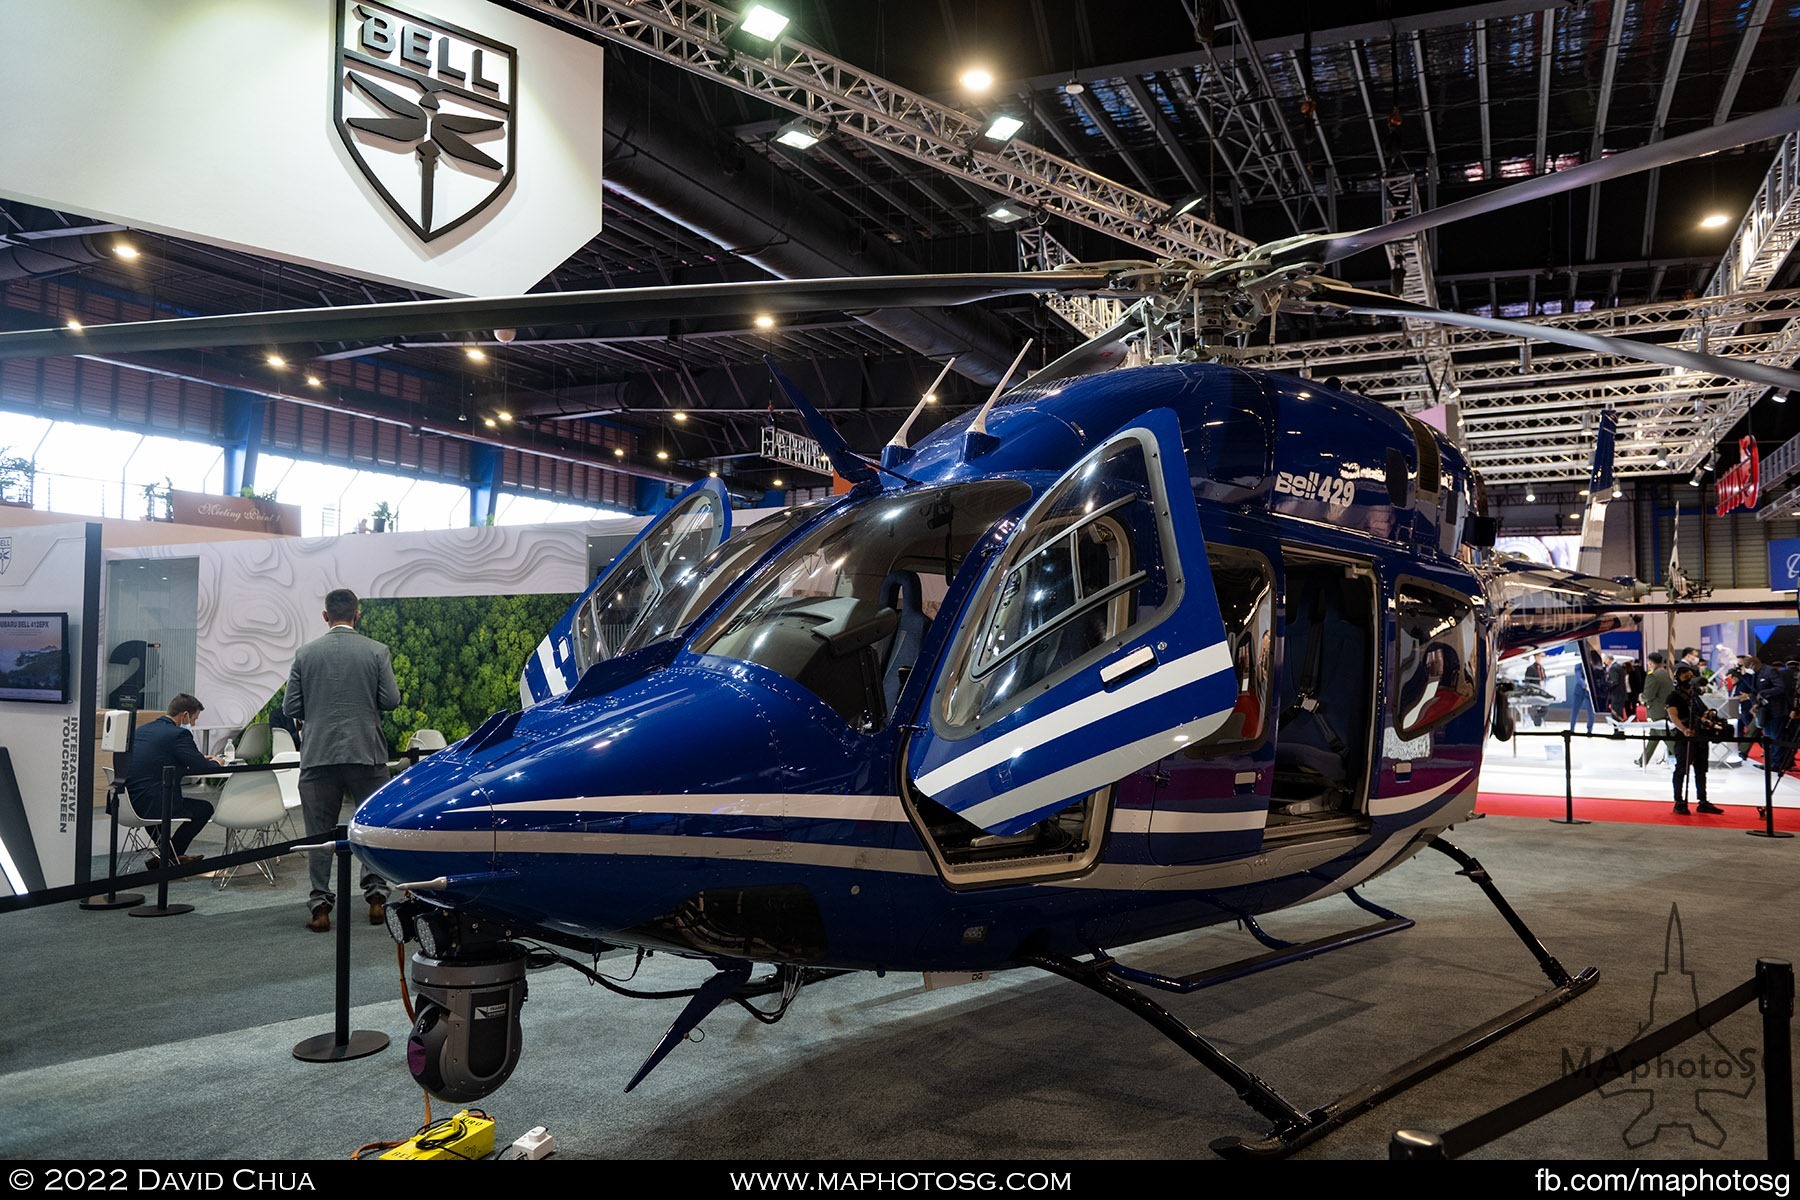 Paramilitary configured Bell 429 helicopter first time being shown by the company in APAC